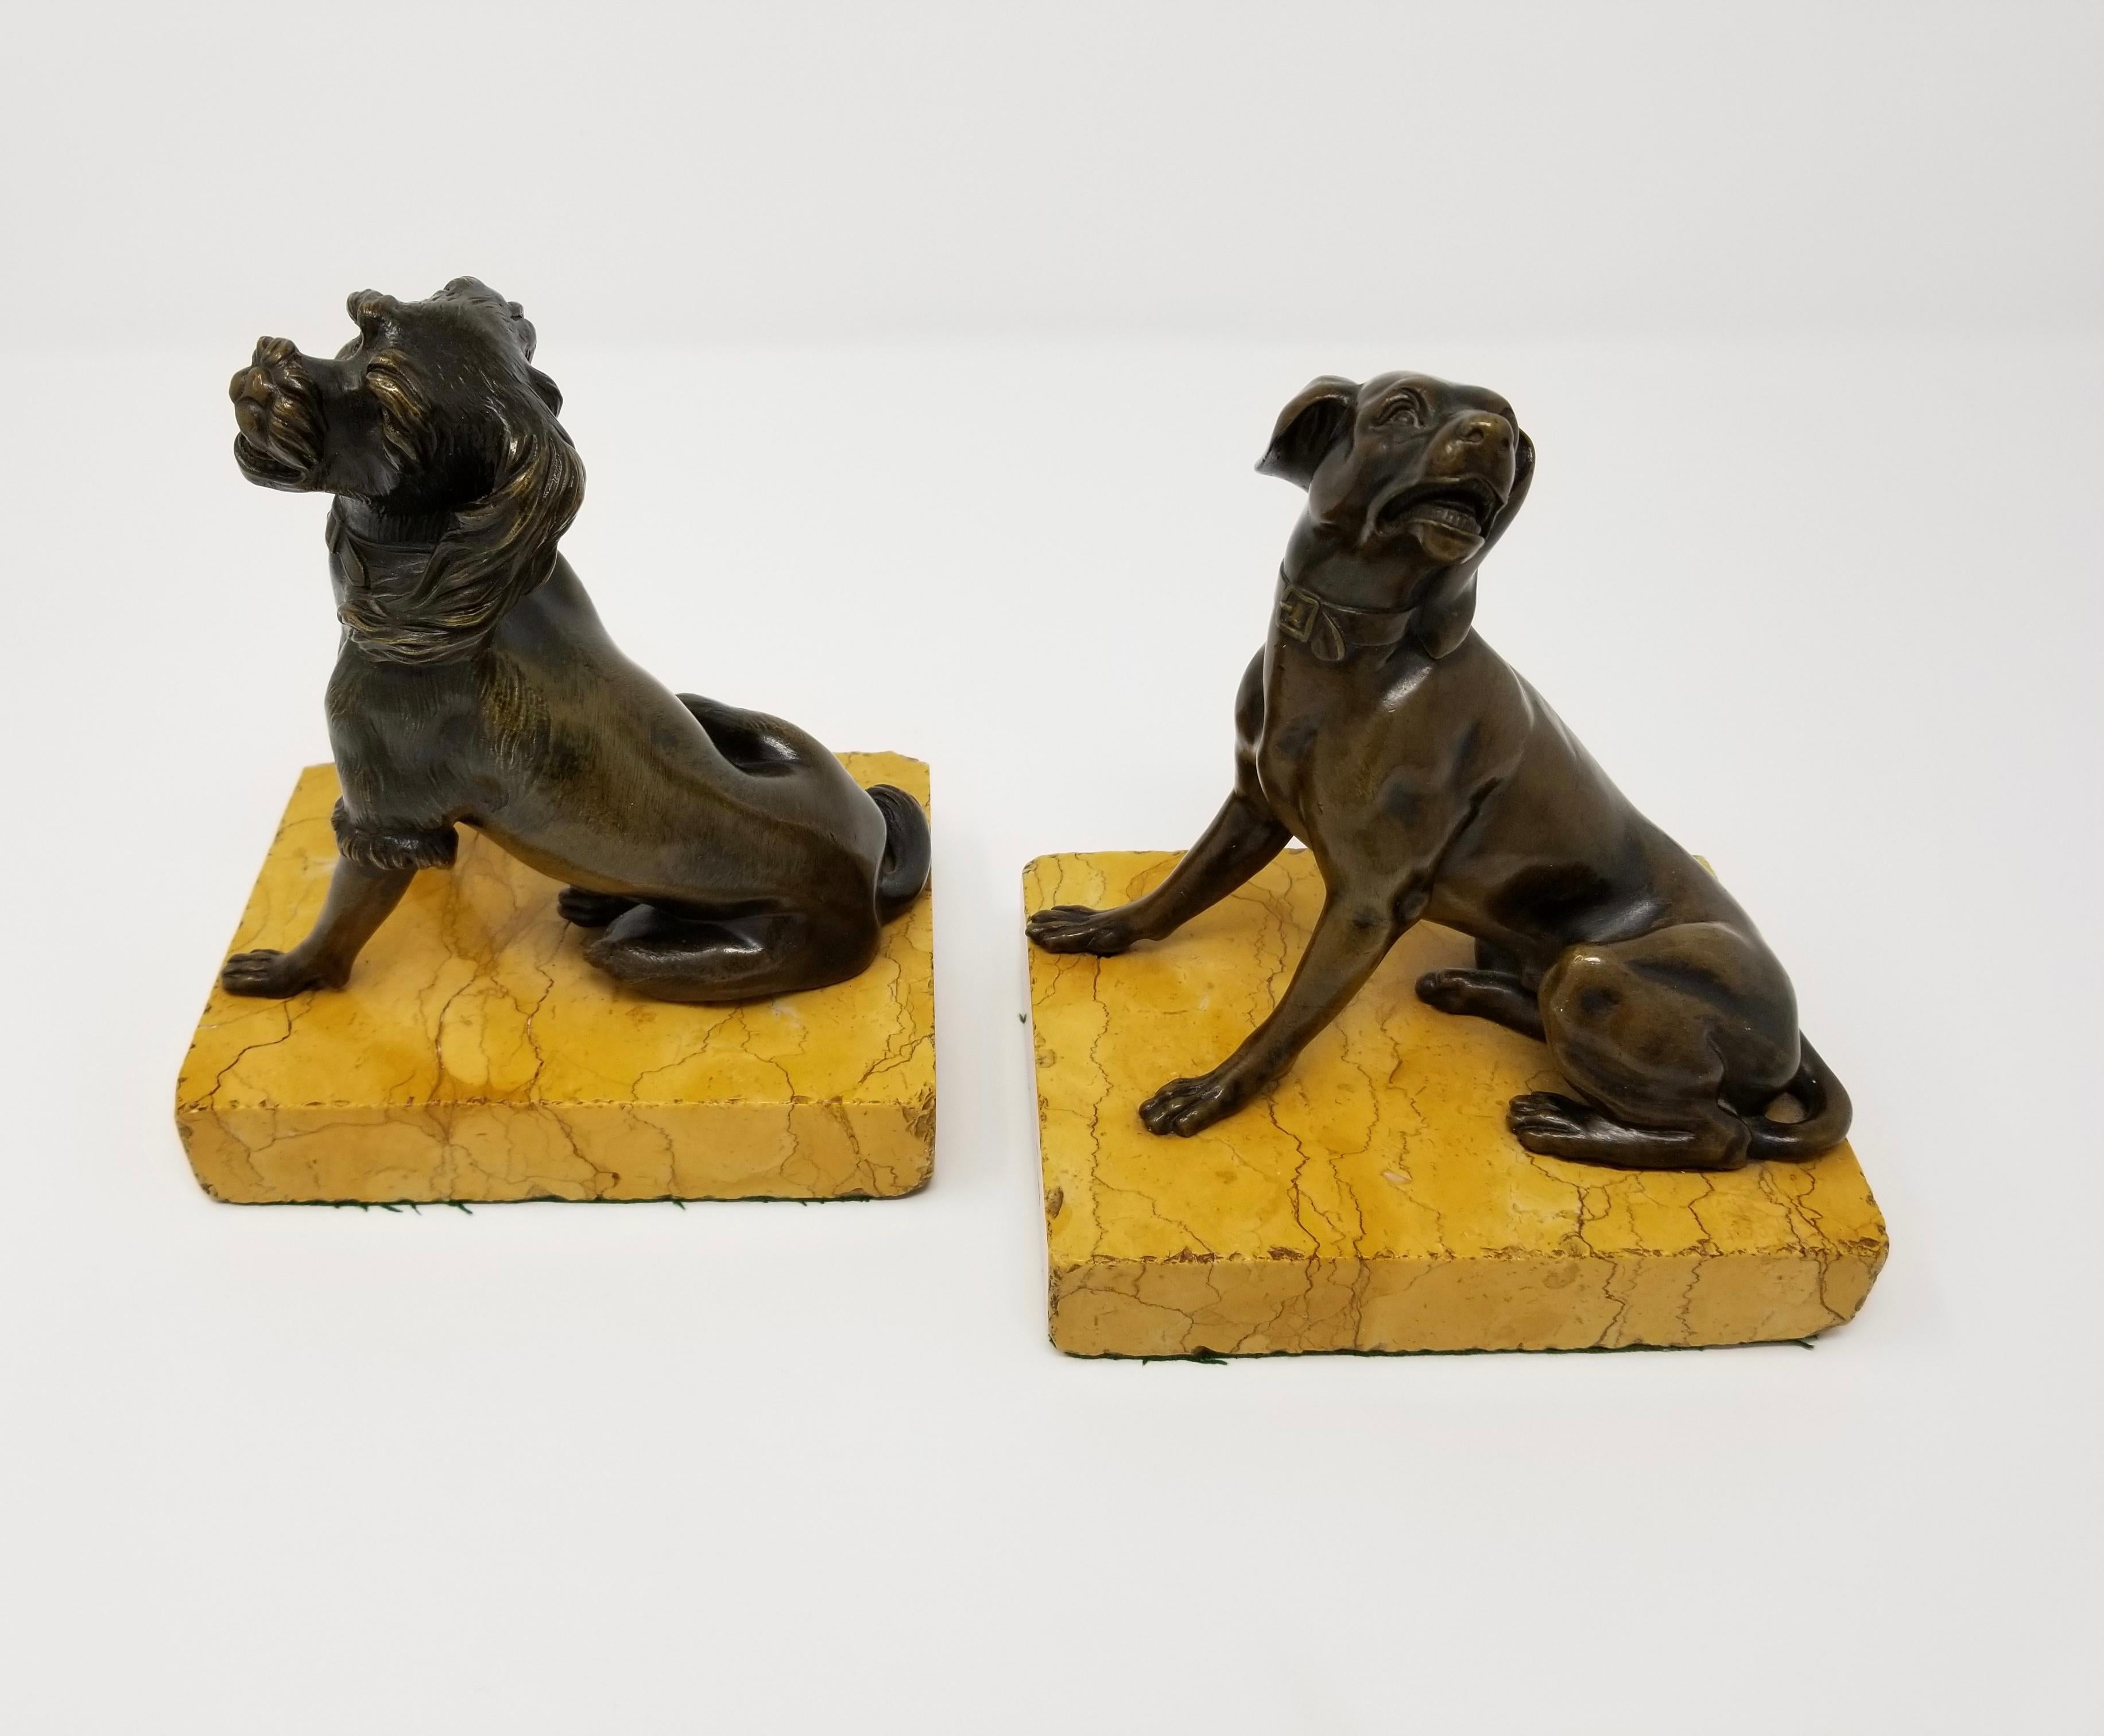 A beautiful pair of 19th century antique grand tour patinated bronze dogs seated on siena marble plinths. Each dog is beautifully cast and hand-chiseled with meticulous craftsmanship. Each dog is further decorated in a beautiful brown patina, with